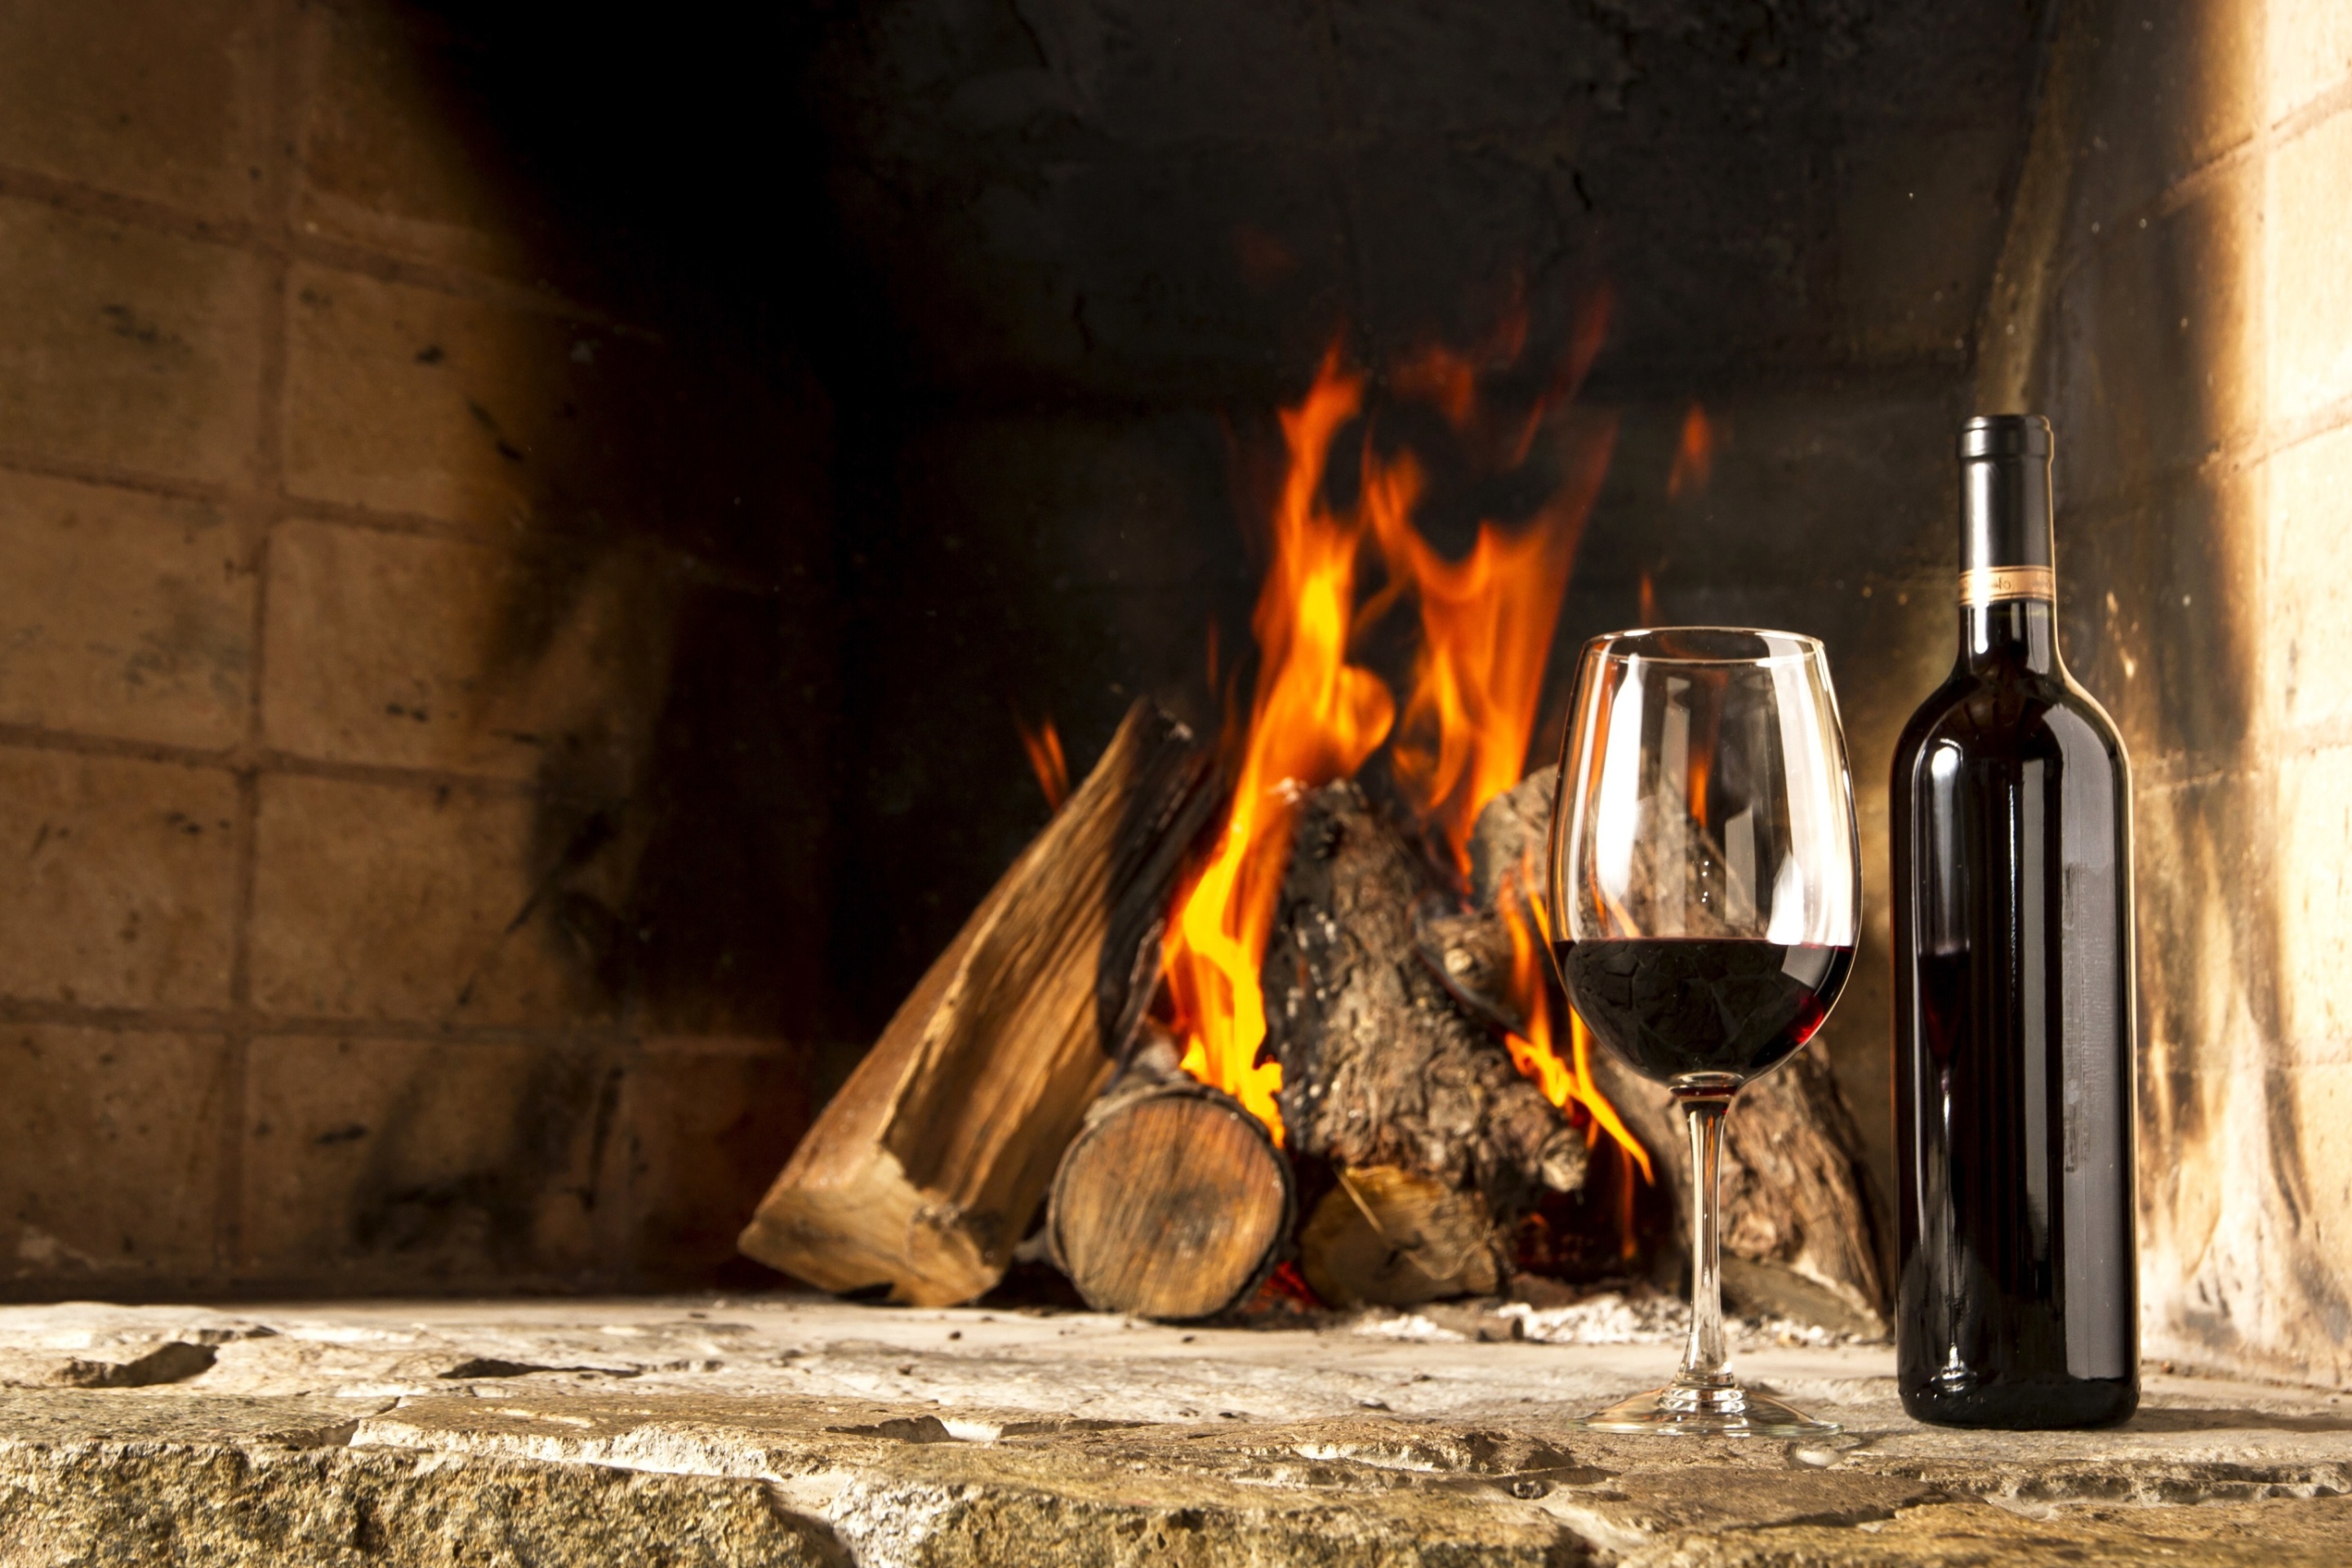 Das Wine and fireplace Wallpaper 2880x1920